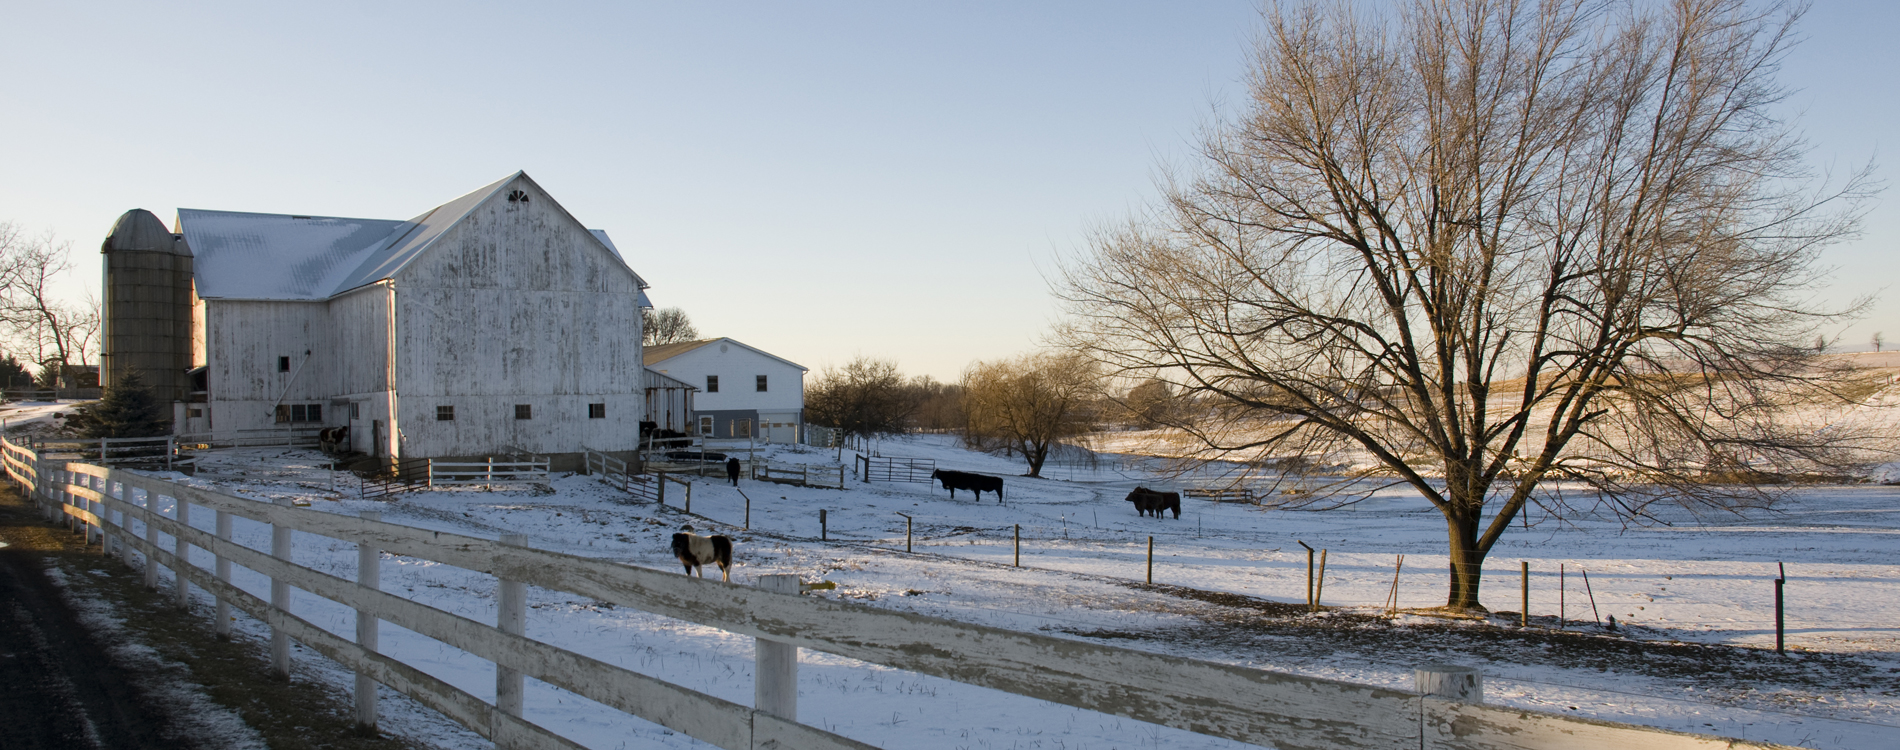 Amish Country, OH - Winter on an Amish Farm